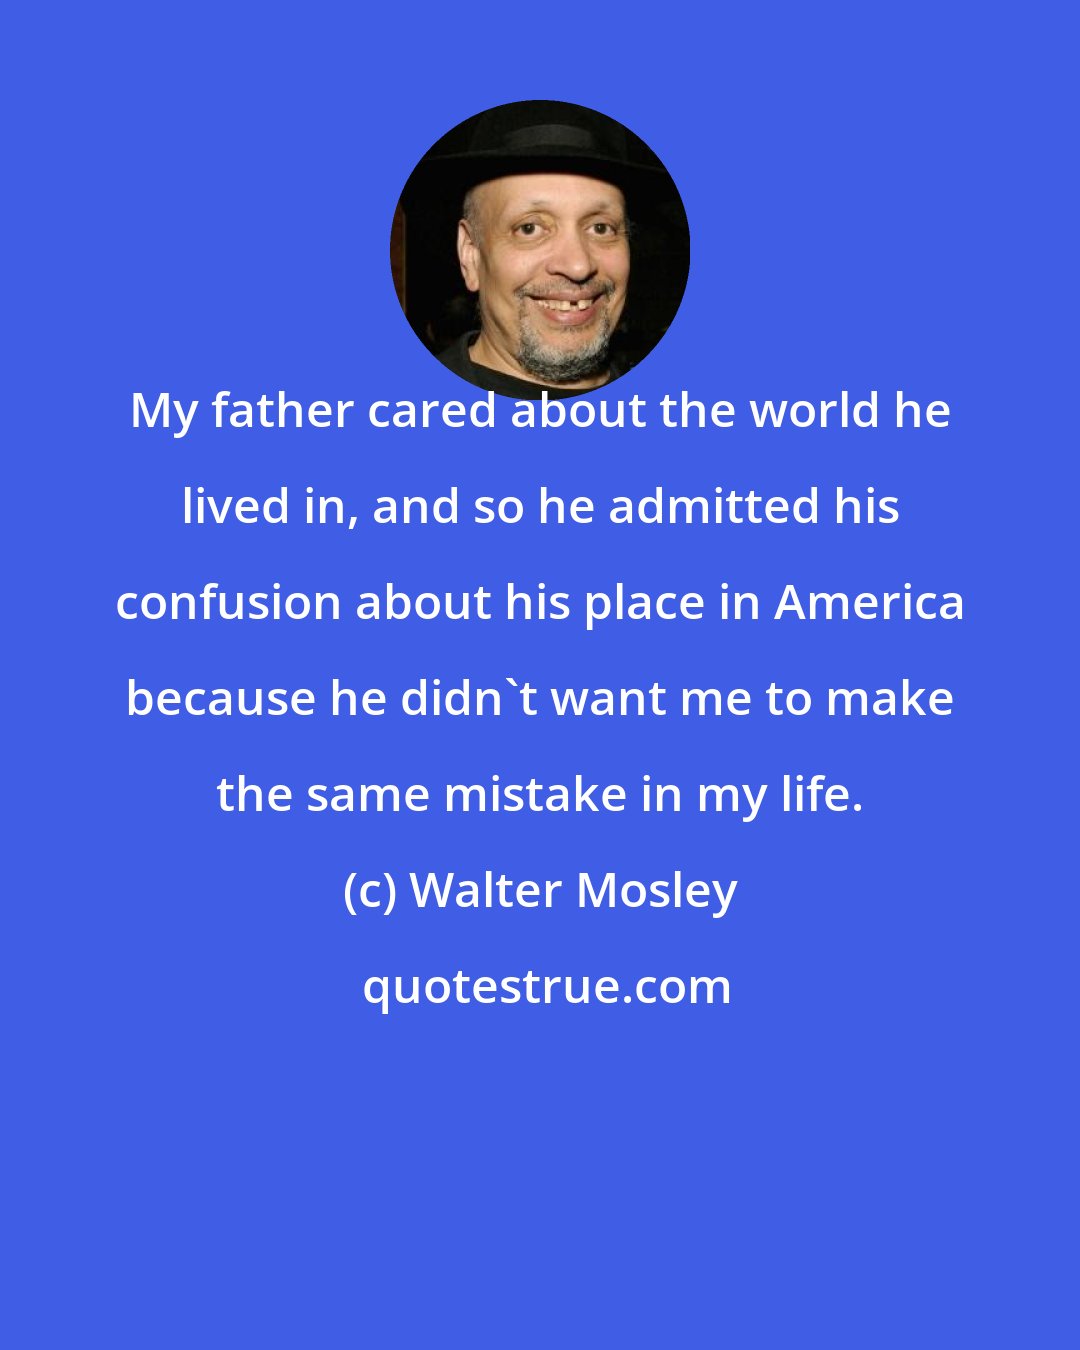 Walter Mosley: My father cared about the world he lived in, and so he admitted his confusion about his place in America because he didn't want me to make the same mistake in my life.